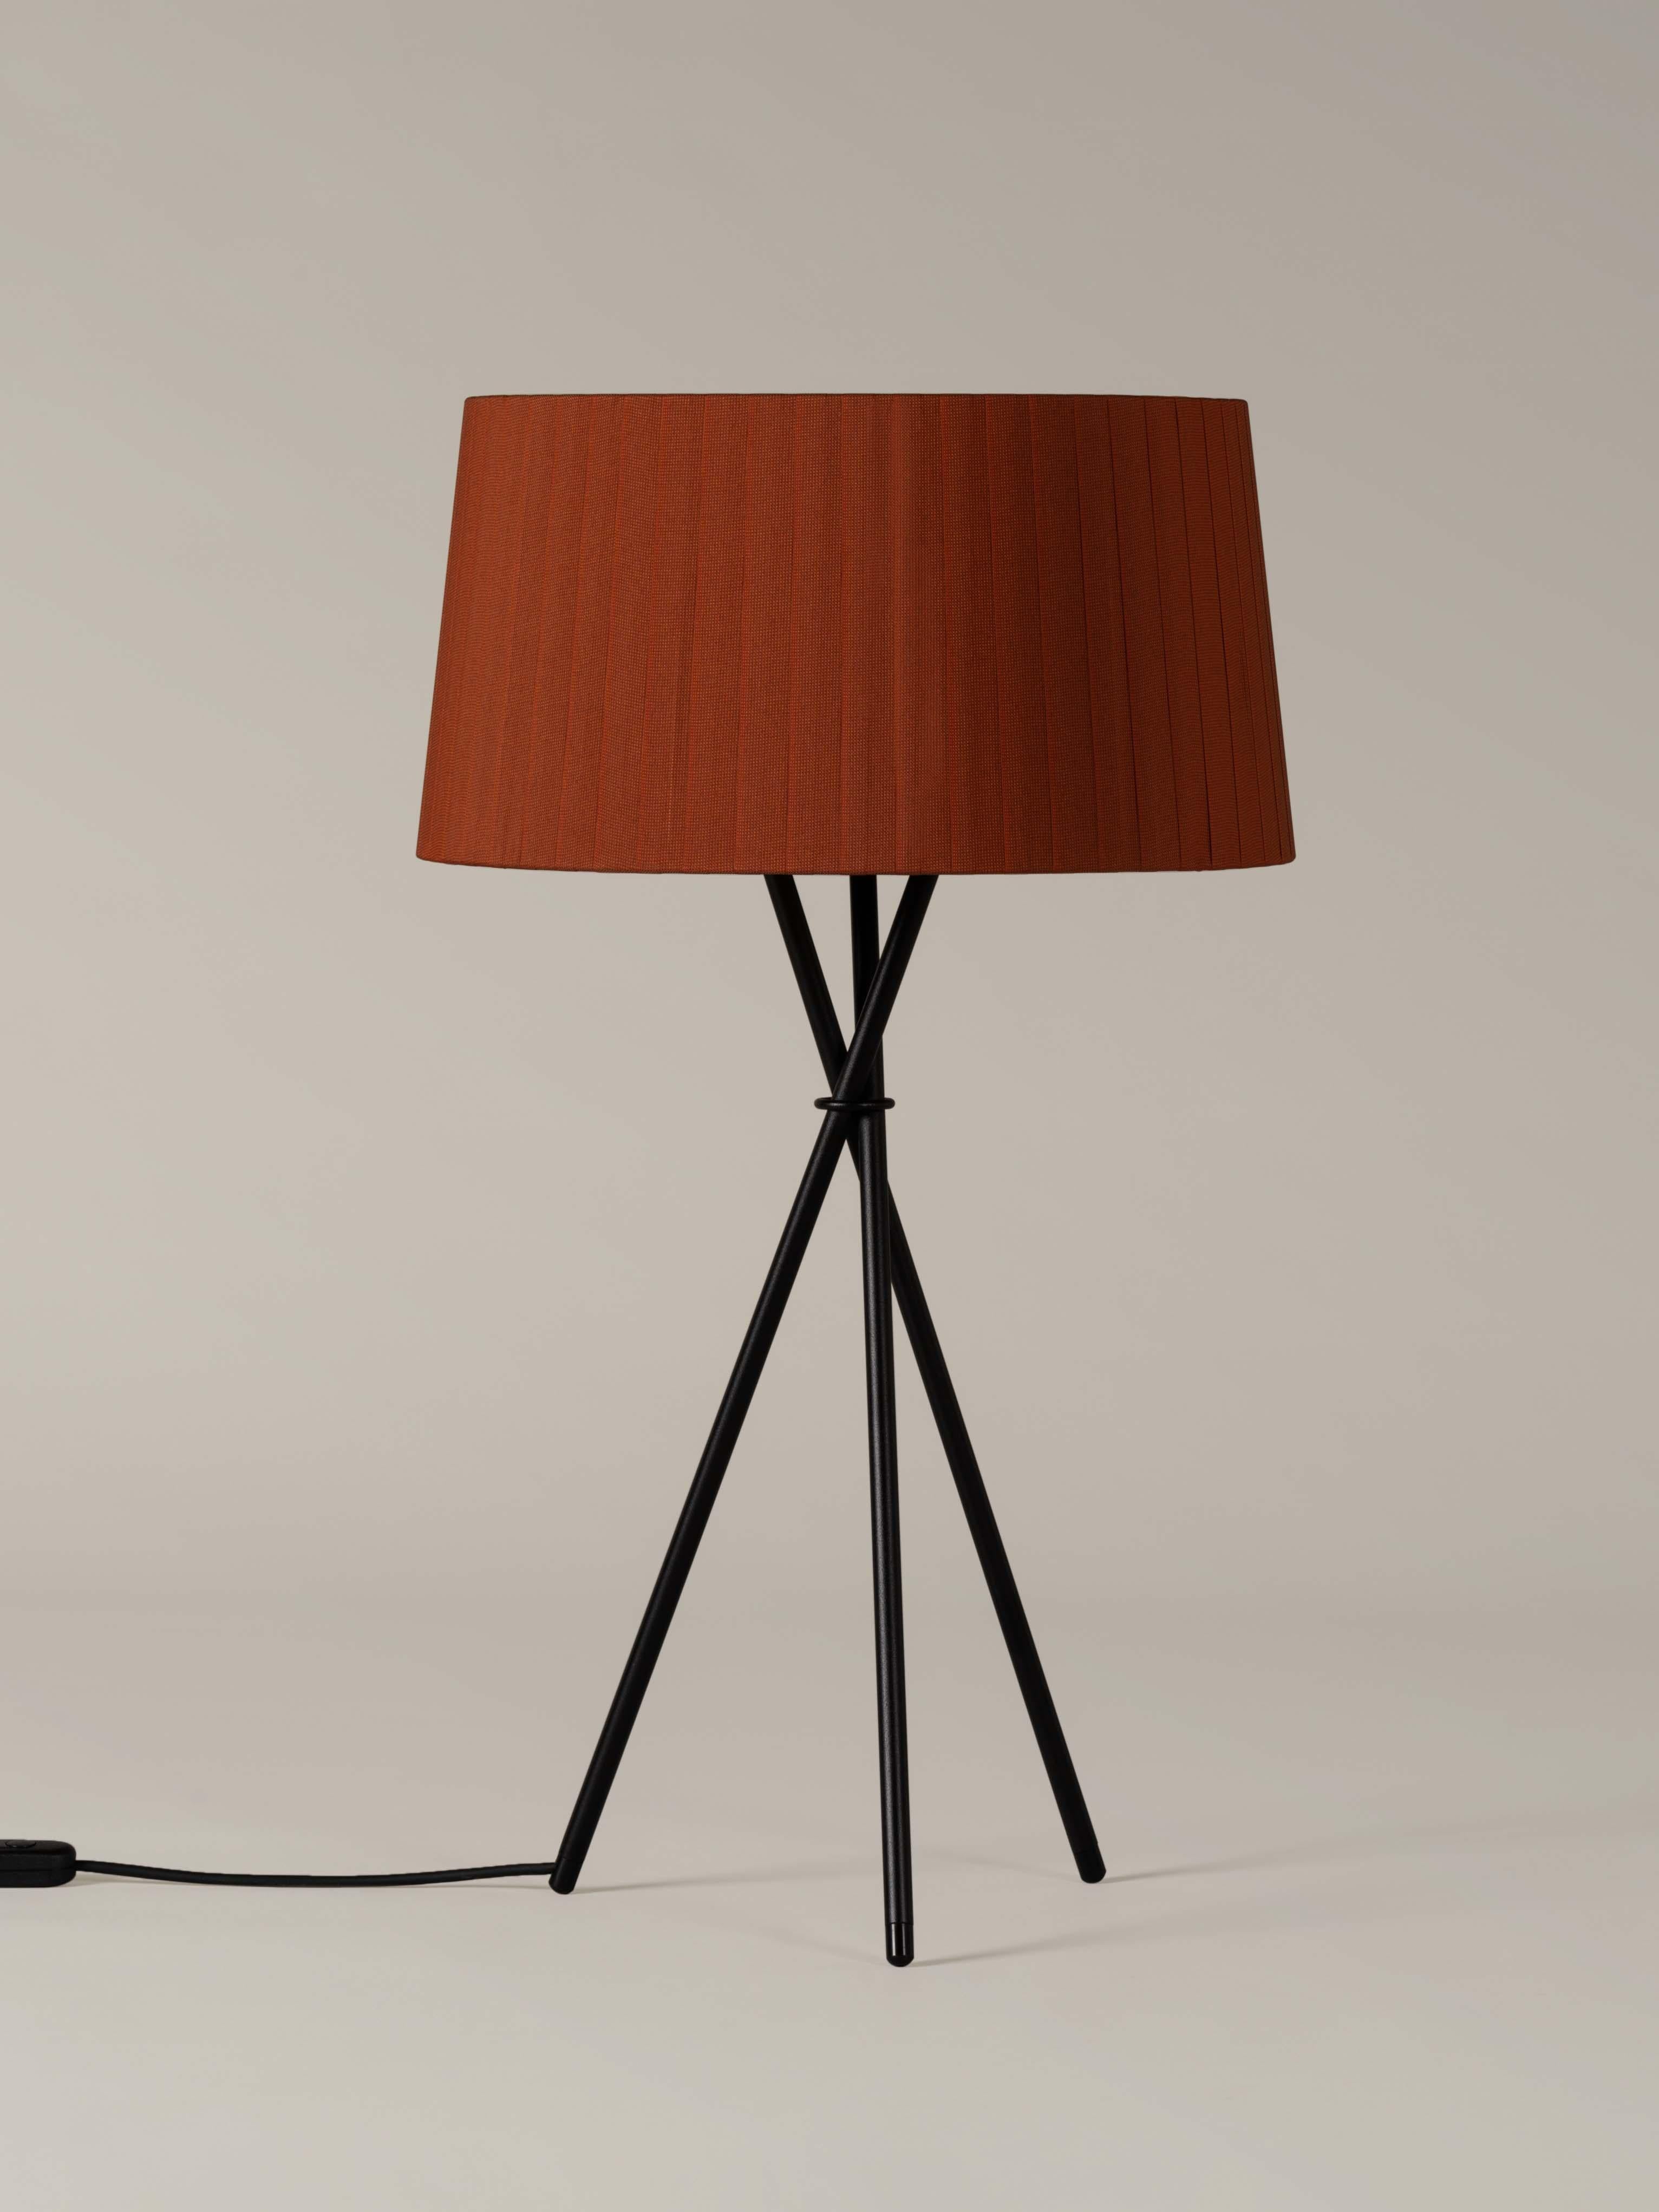 Terracotta trípode G6 table lamp by Santa & Cole
Dimensions: D 45 x H 75 cm
Materials: Metal, ribbon.
Available in other colors.

Trípode humanises neutral spaces with its colourful and functional sobriety. The shade is hand ribboned and its